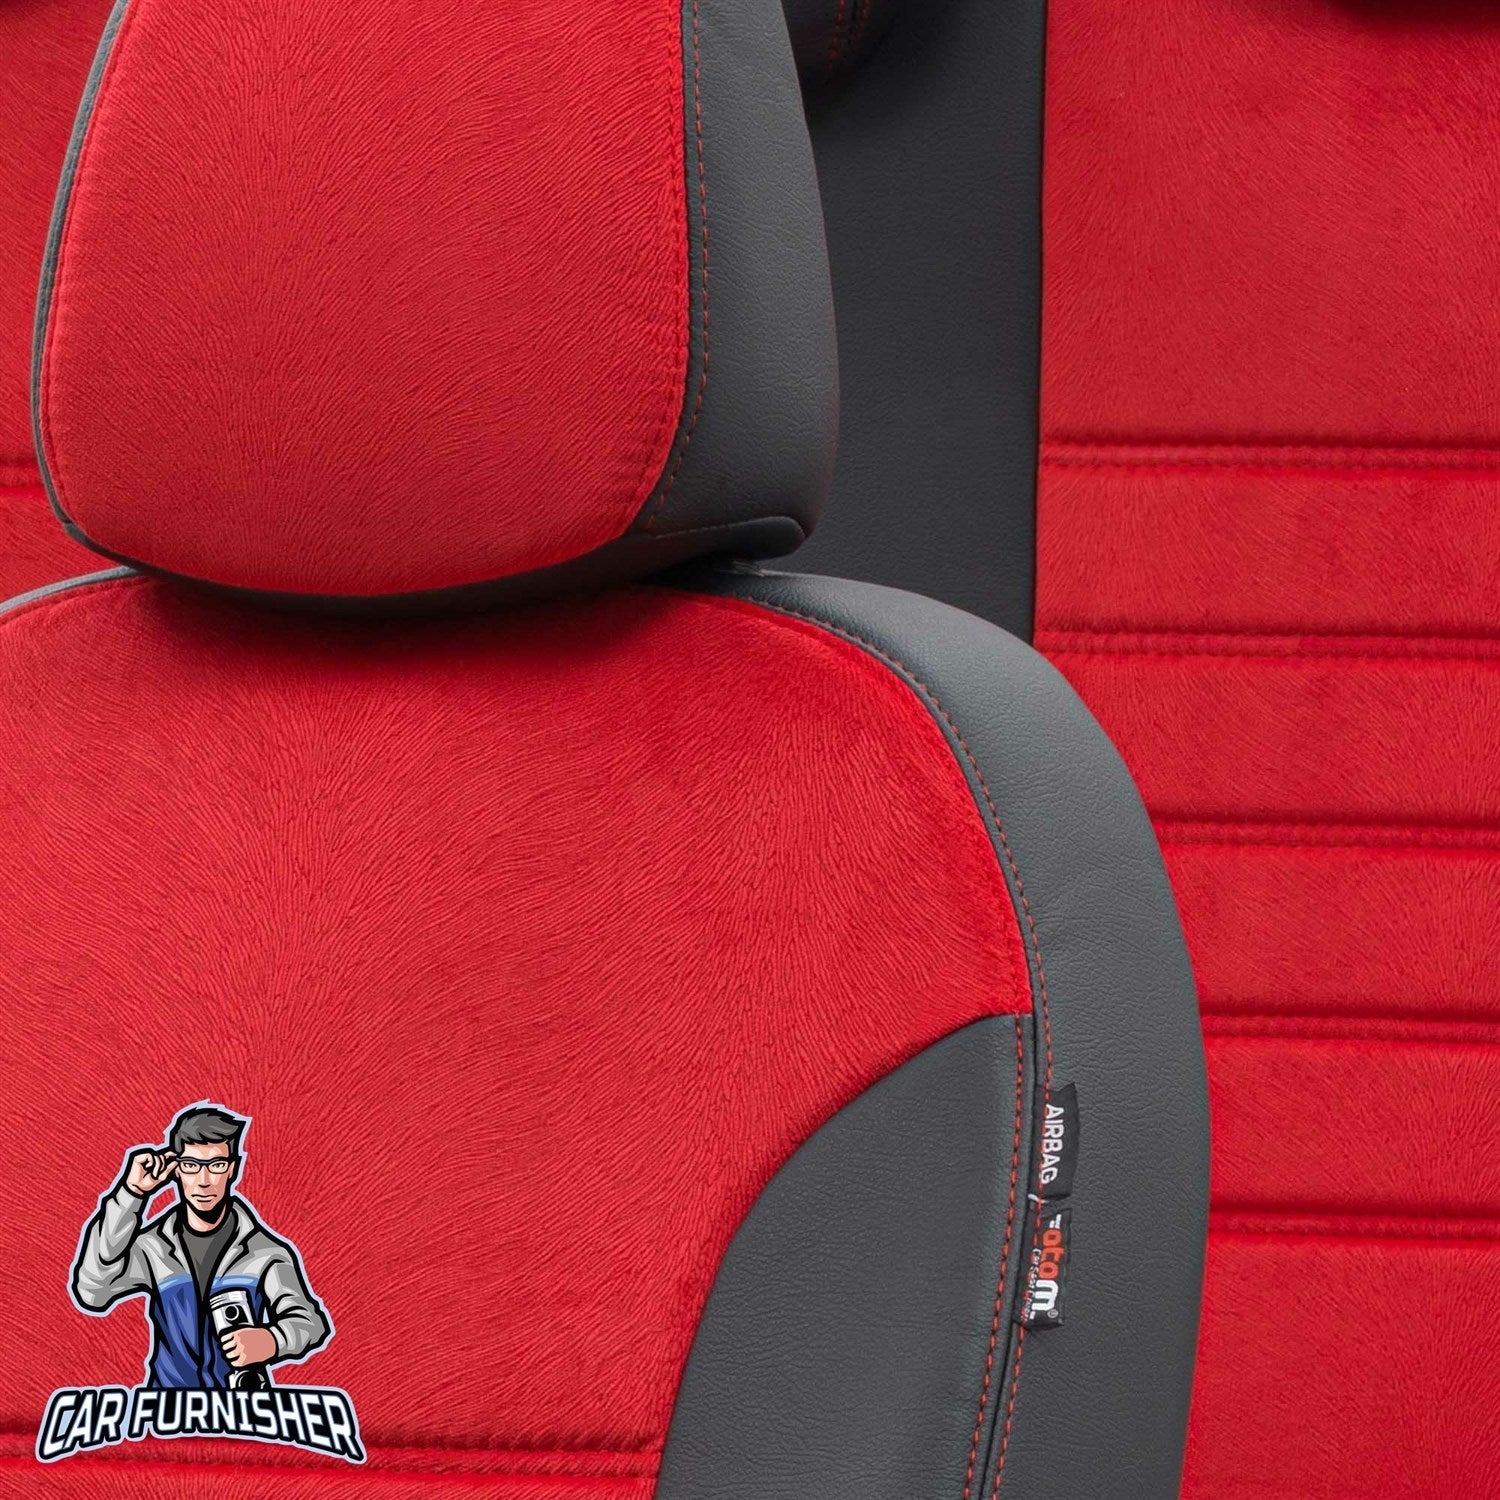 Chevrolet Tahoe Car Seat Covers 2007-2014 GMT/LS/LTZ London Red Full Set (5 Seats + Handrest) Leather & Fabric